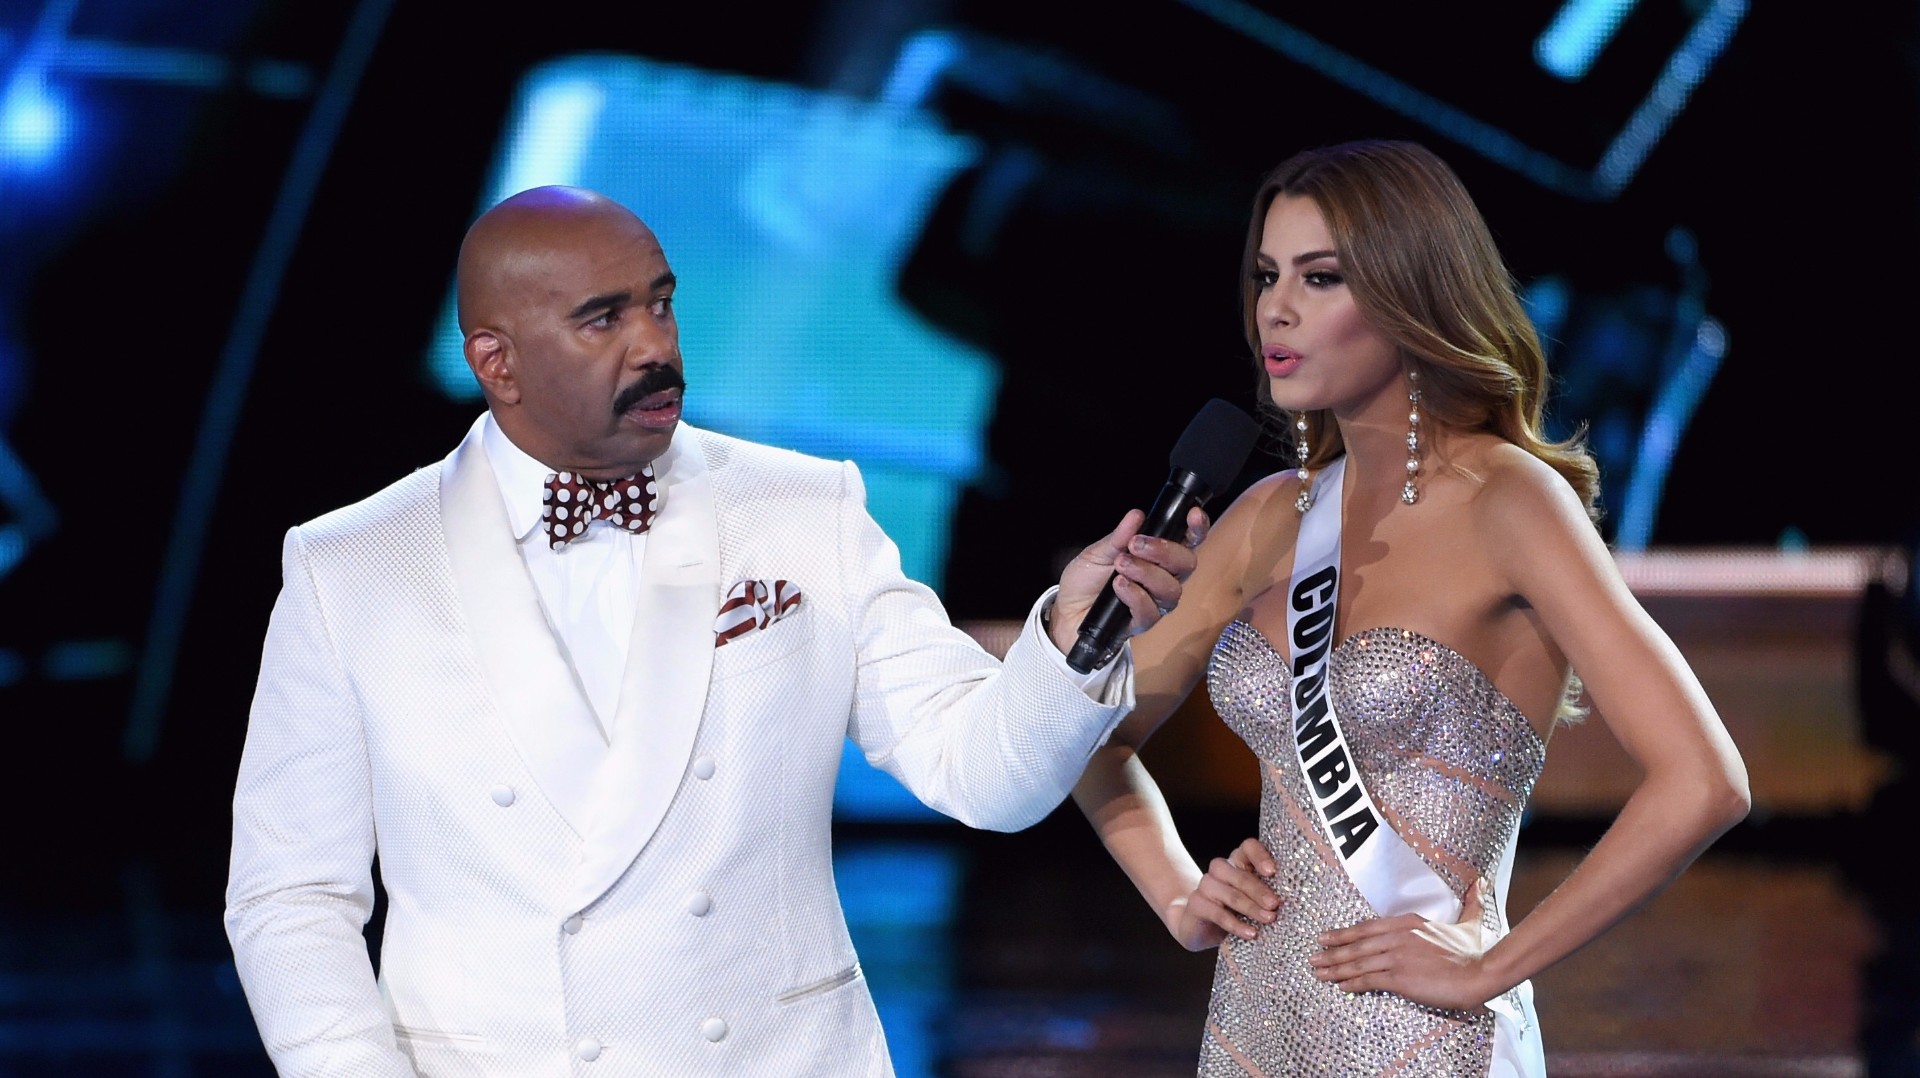 People Hate You Miss Colombia Roasts Steve Harvey At Miss Universe 2017